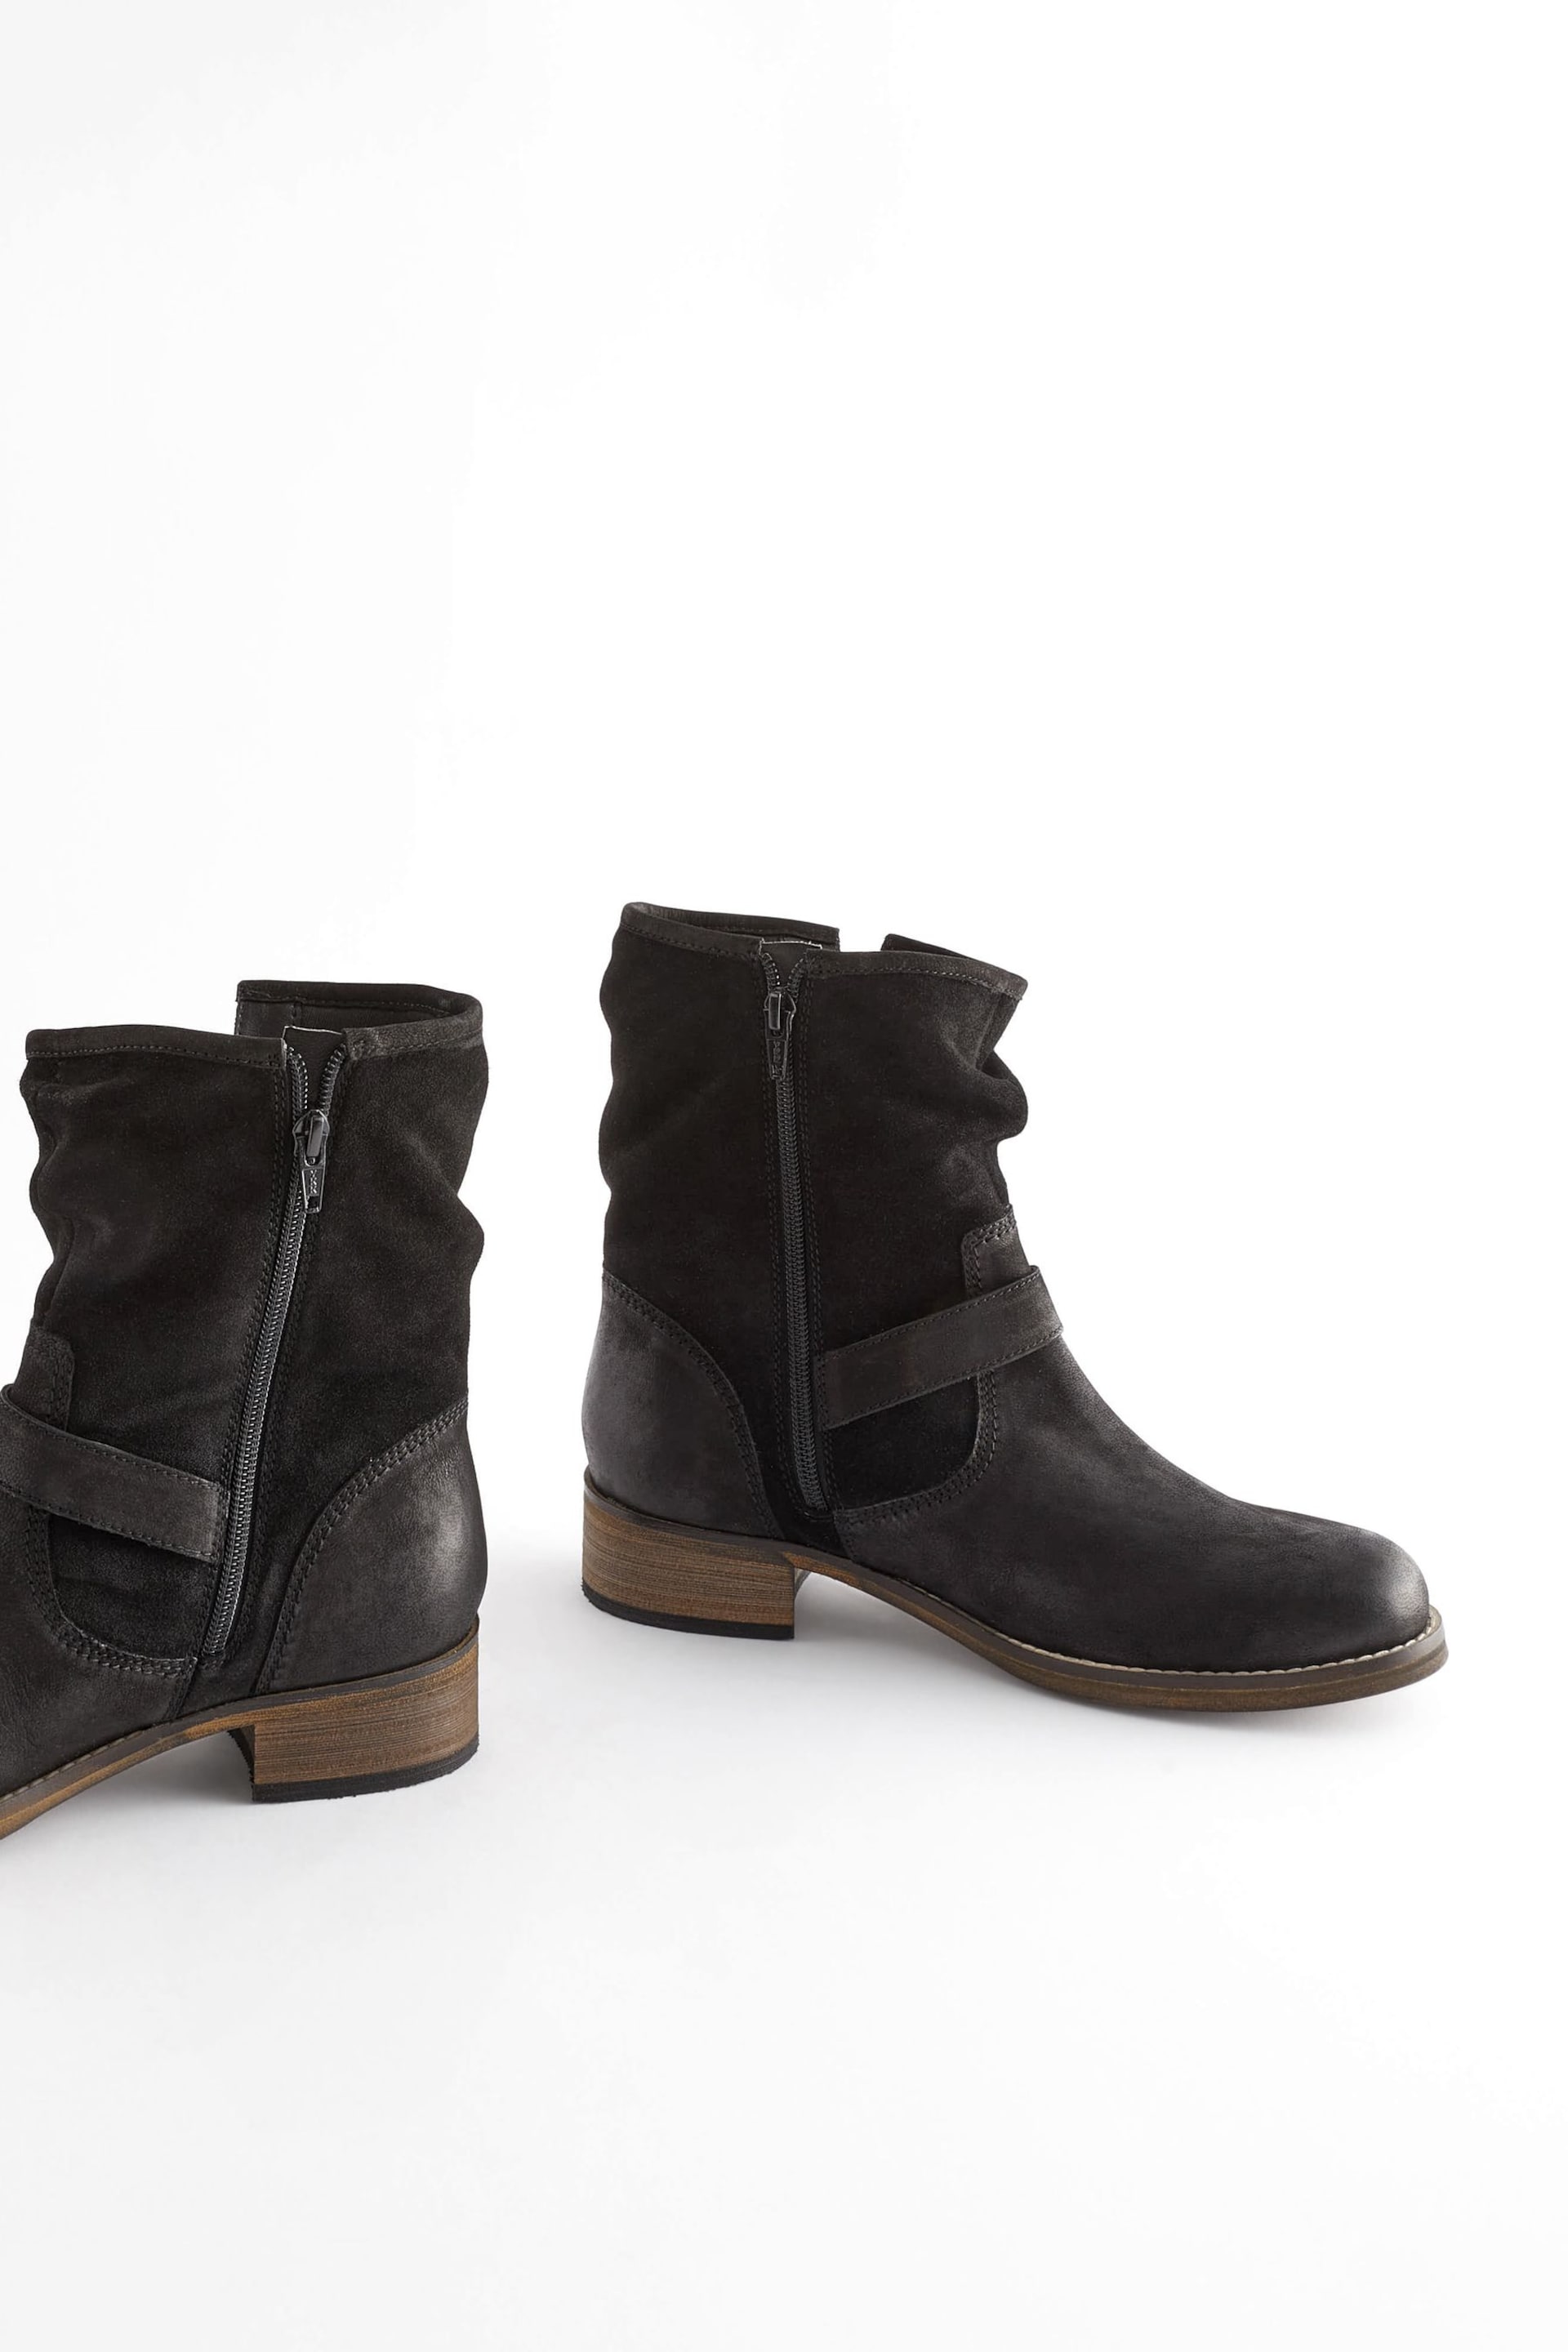 Black Regular/Wide Fit Forever Comfort® Leather Slouch Ankle Boots - Image 5 of 7